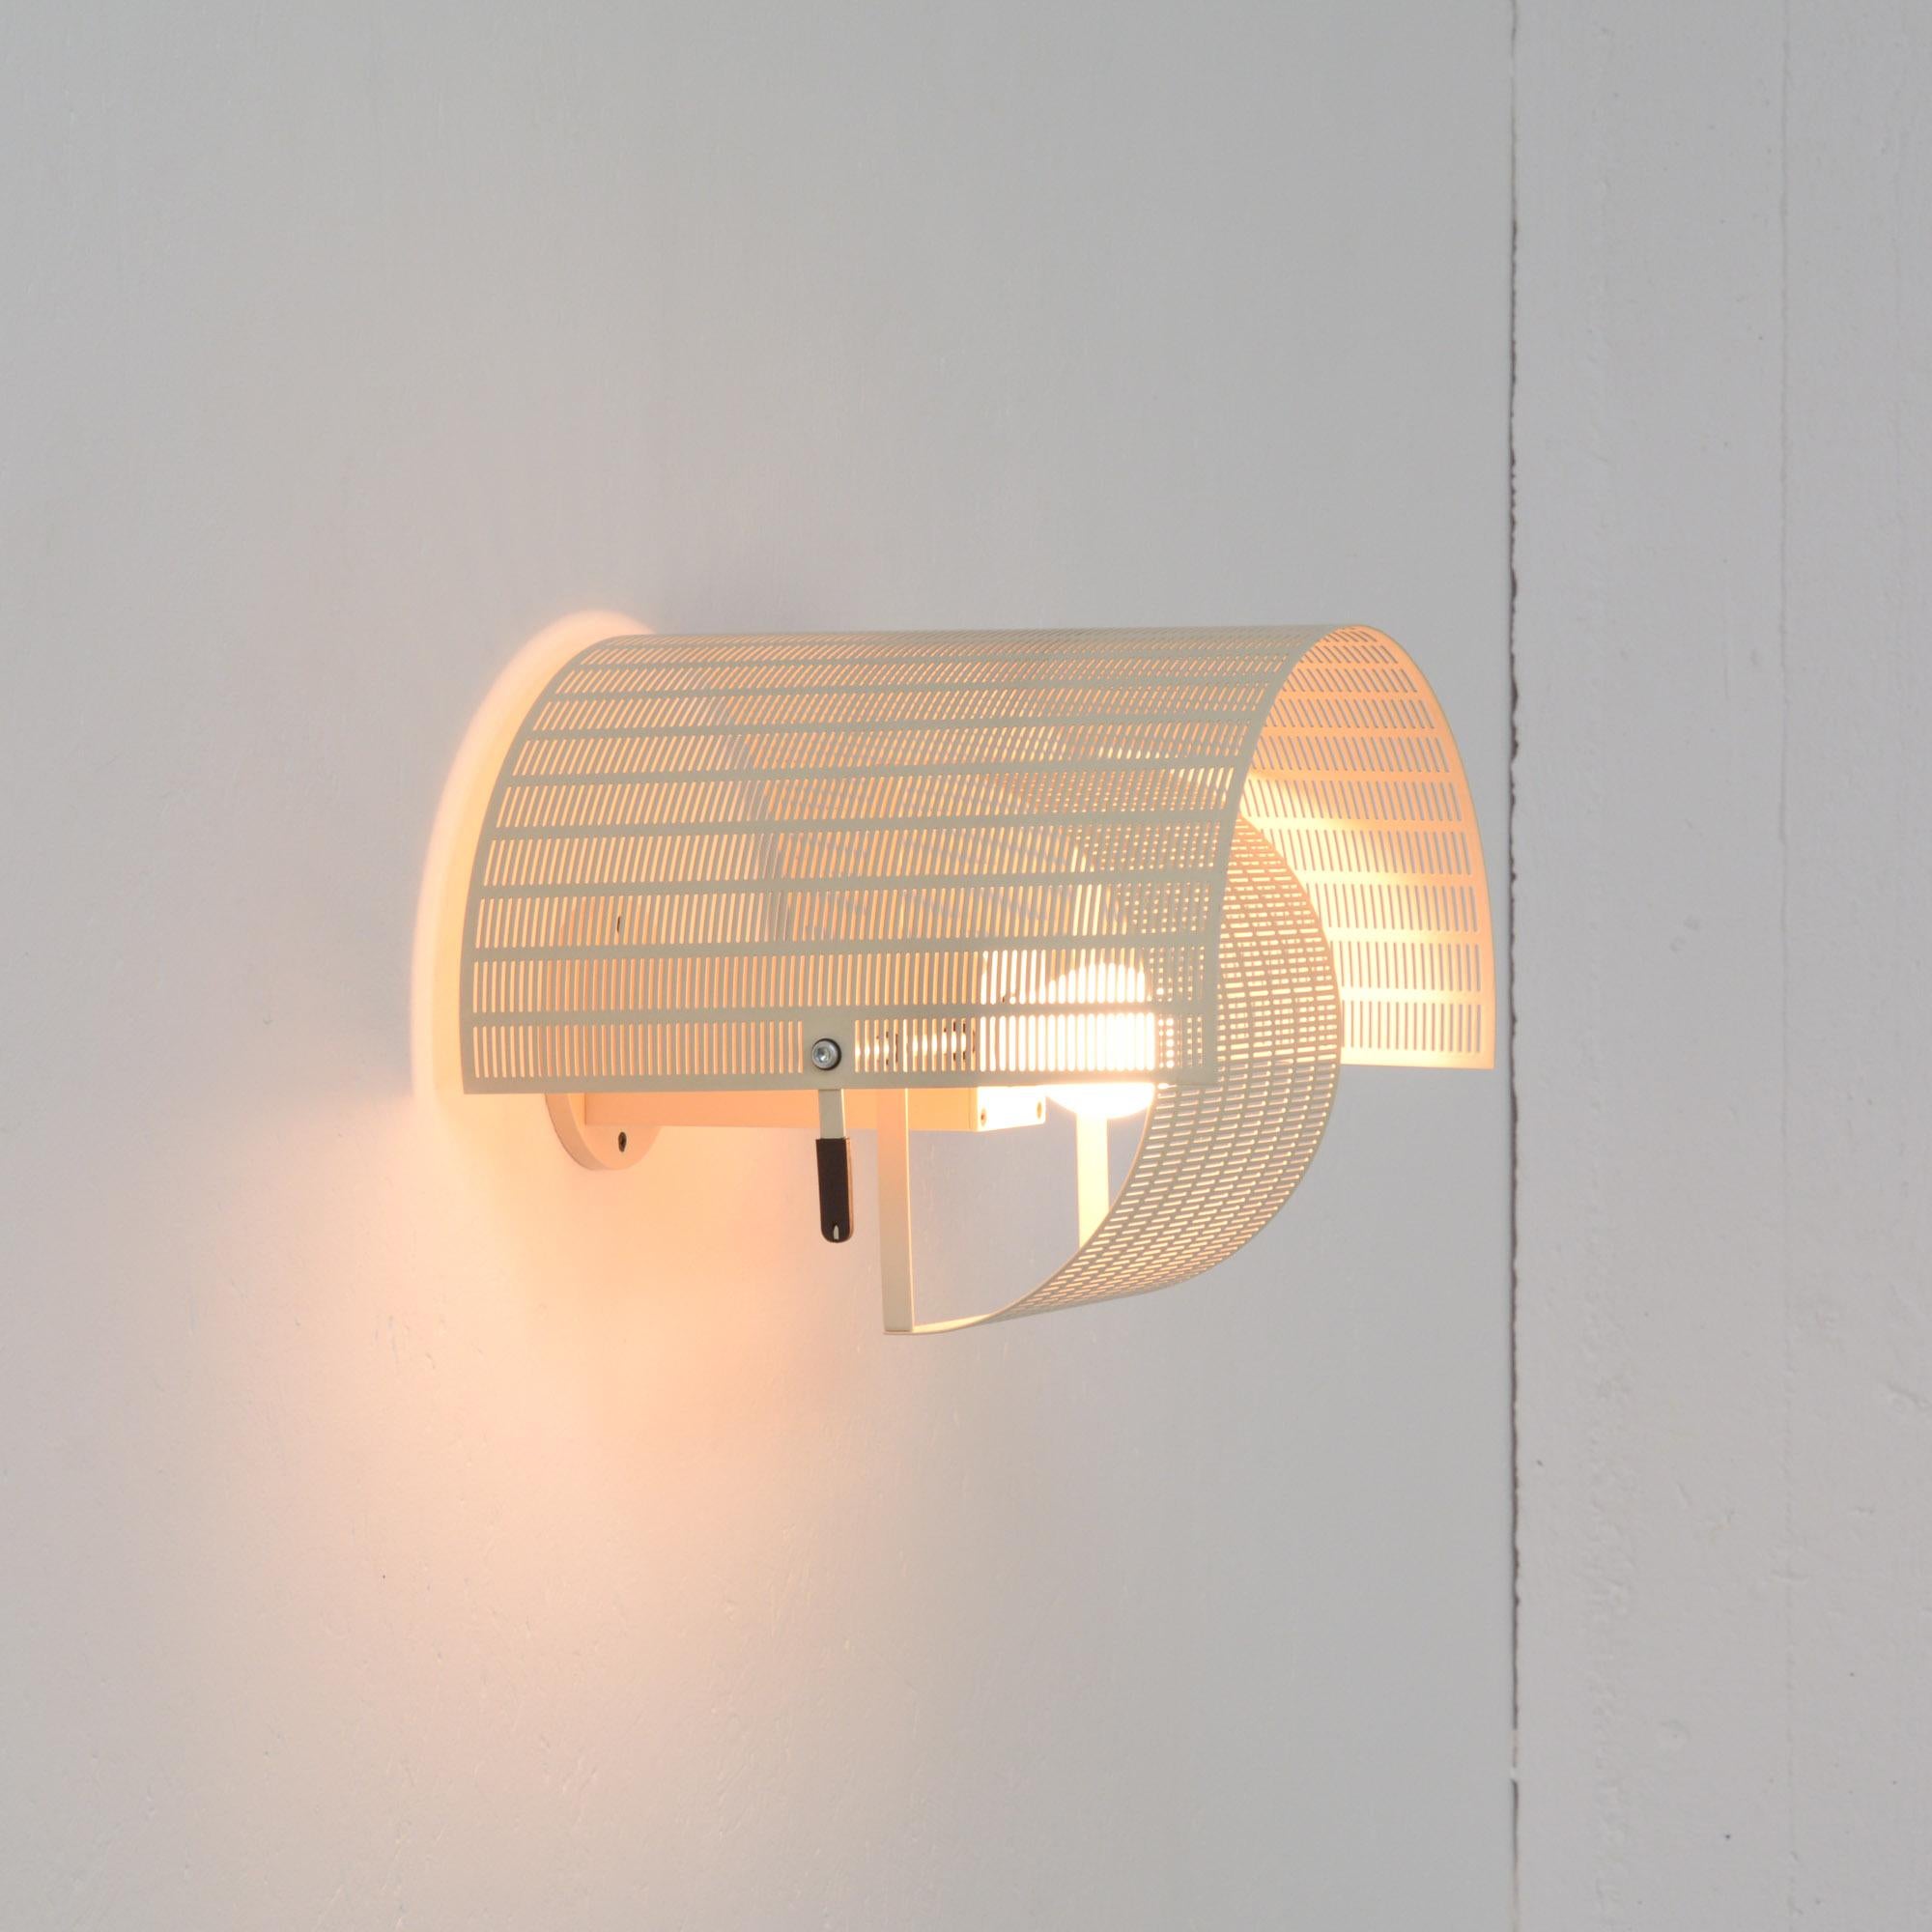 This sculptural wall lamp Shogun was designed by Mario Botta for Artemide, Italy in 1986.
The Postmodern Swiss architect and designer Mario Botta is renowned for his use of striking geometric forms. His Shogun lamp reflects his belief that lighting